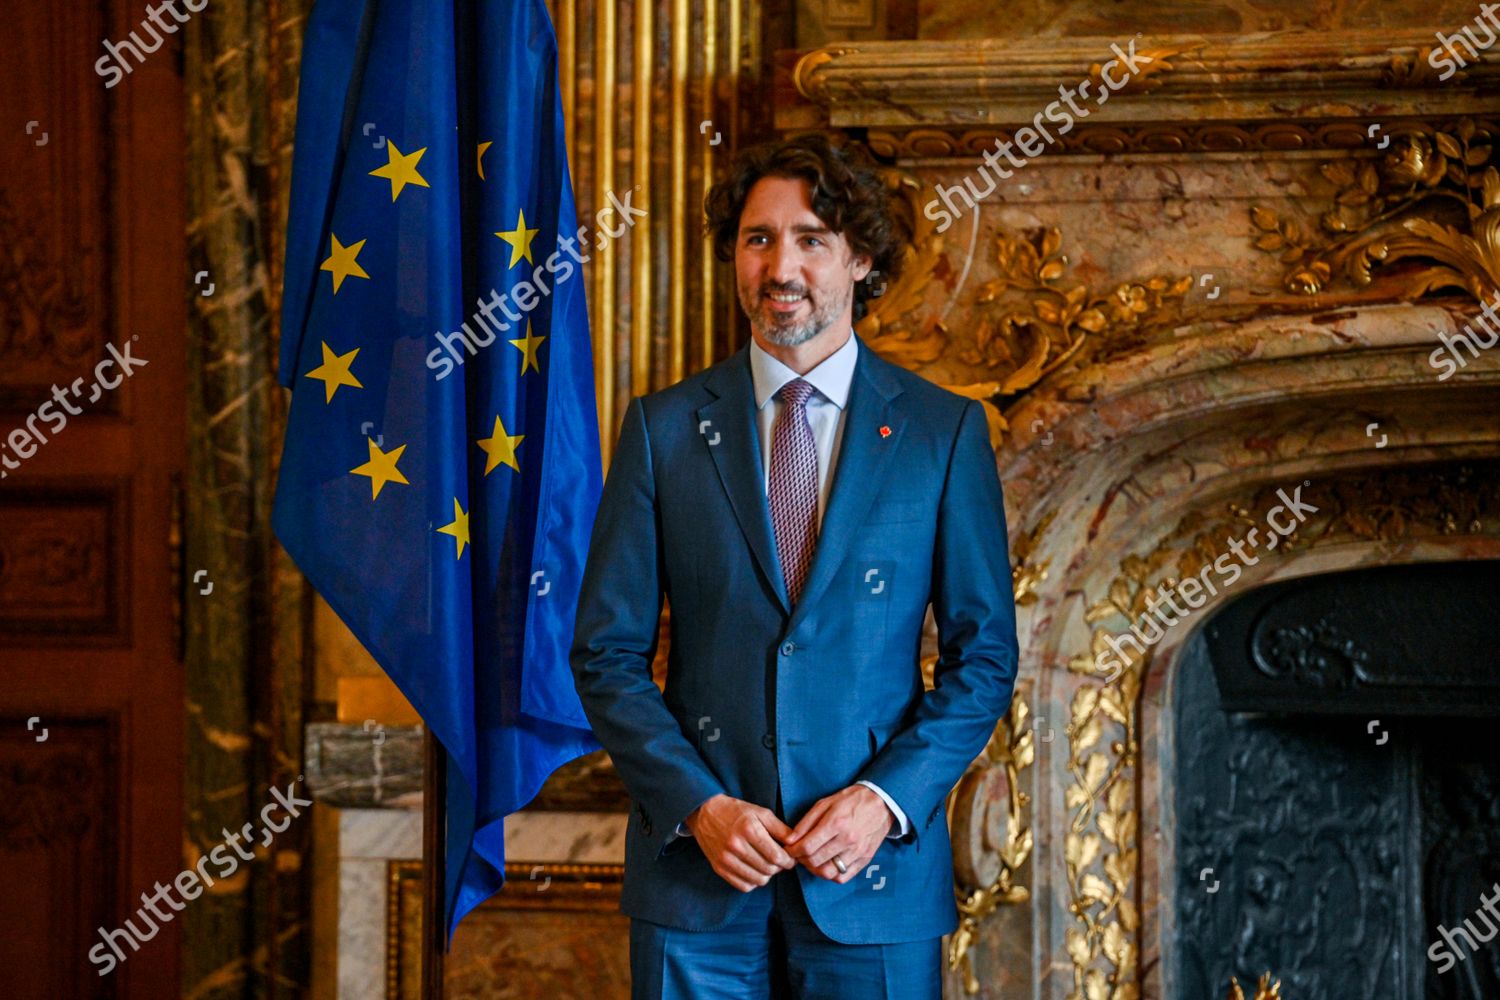 king-philippe-receives-canadian-prime-minister-justin-trudeau-brussels-belgium-shutterstock-editorial-12084205d.jpg